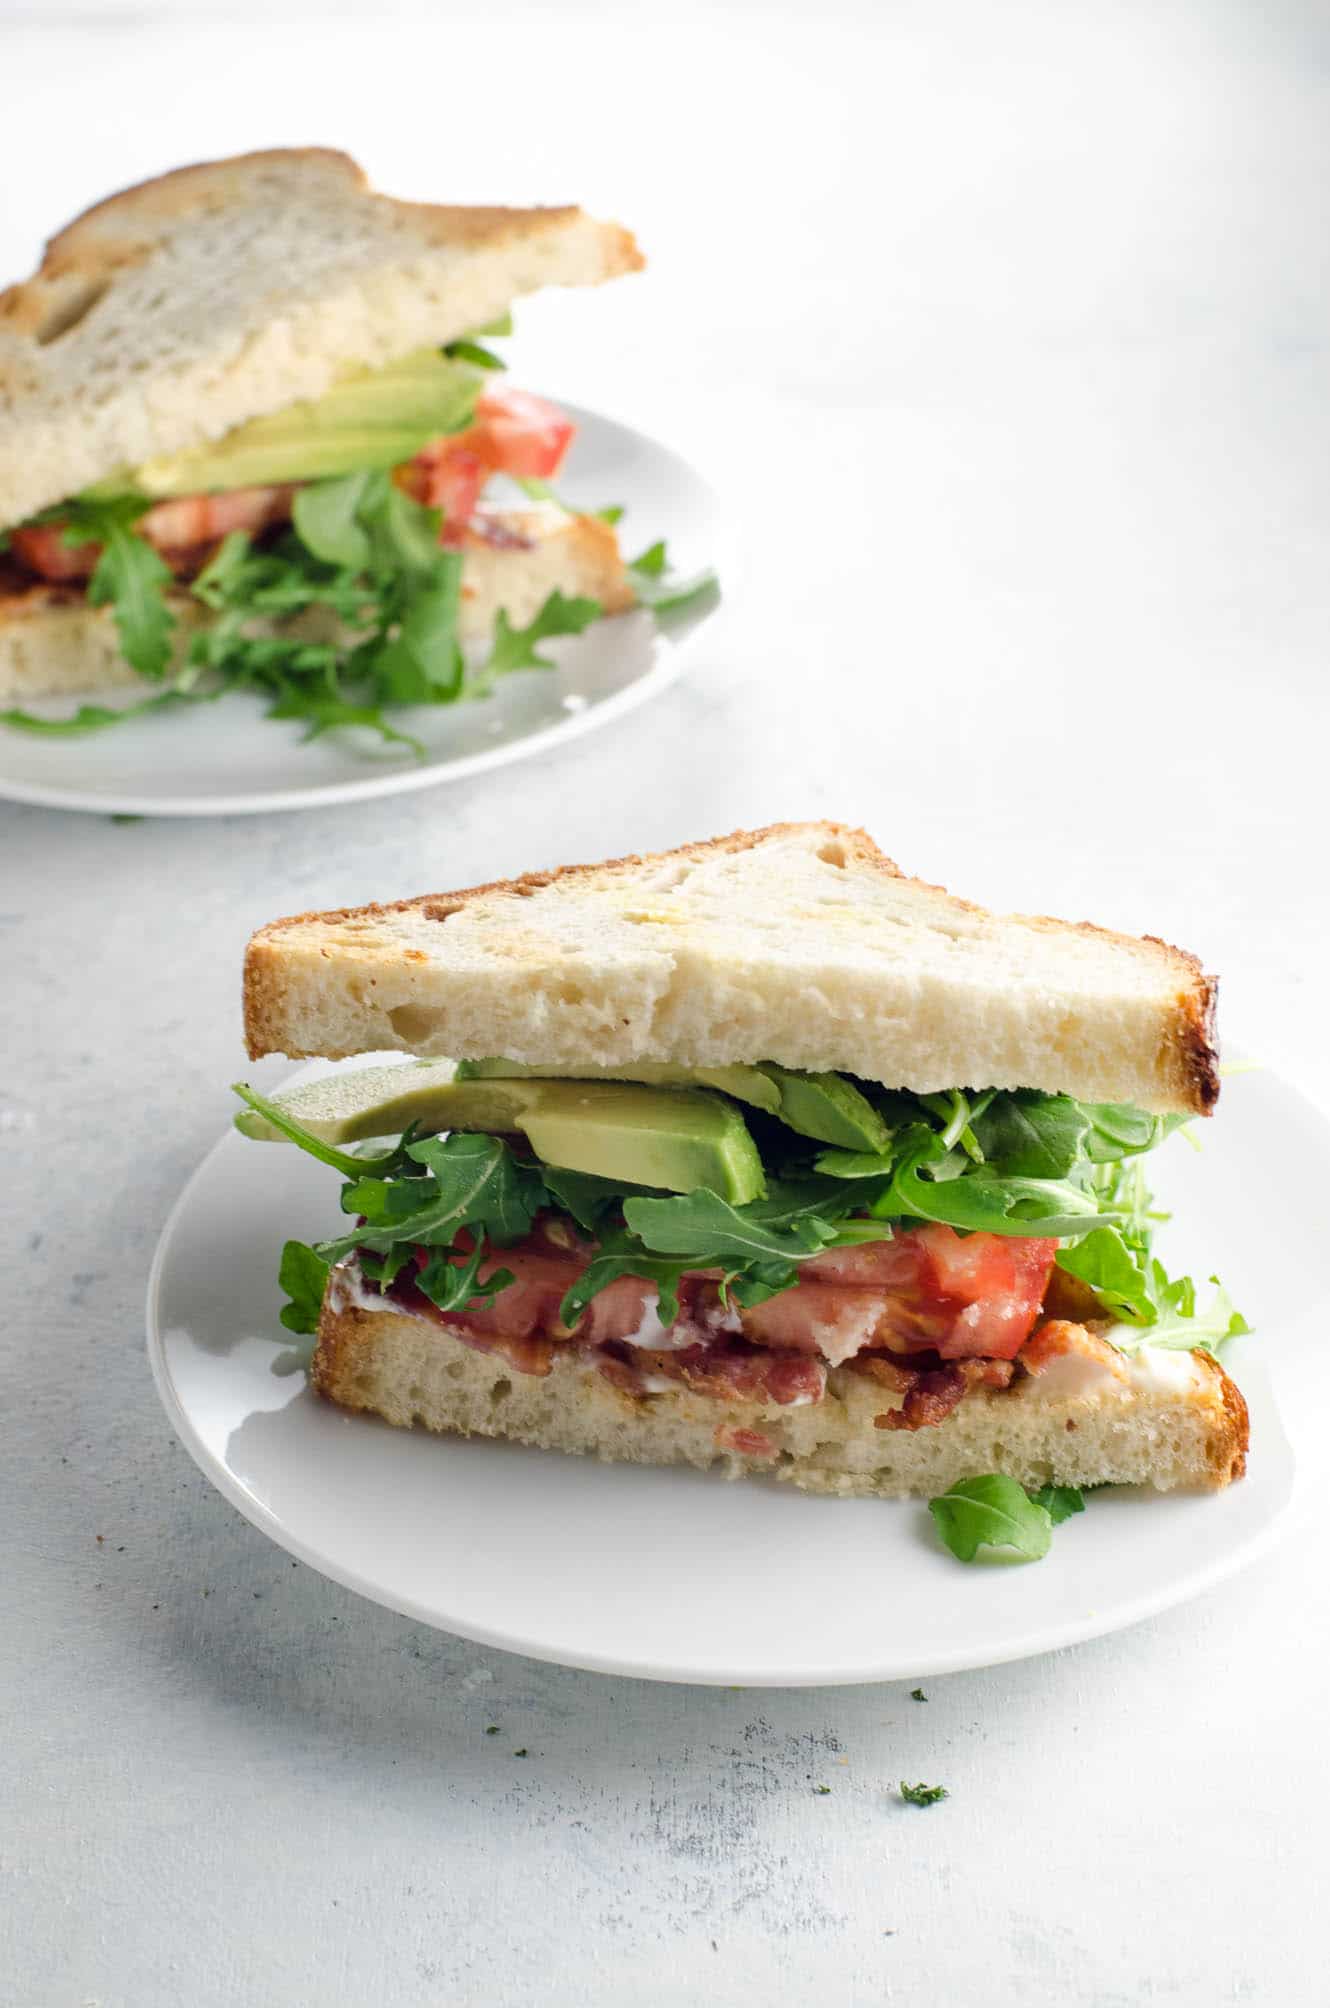 A BLAT sandwich divided between two plates